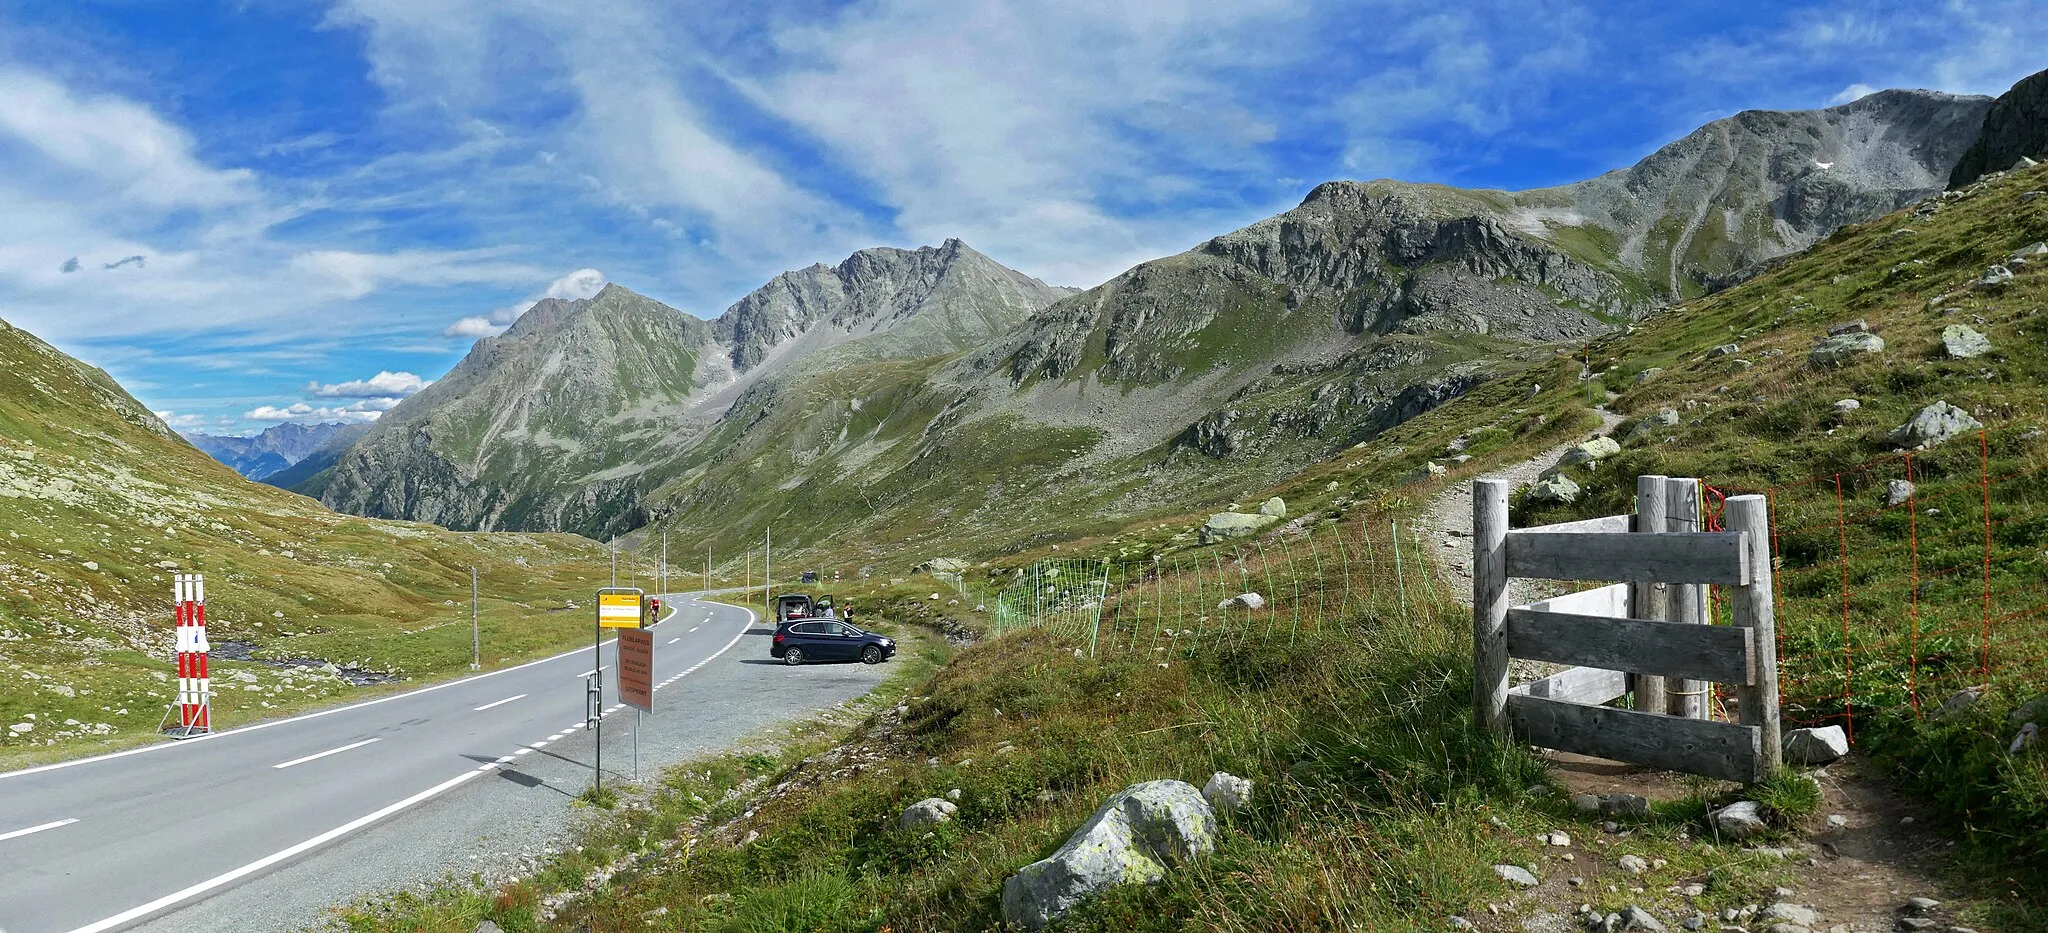 Photo showing: Abzw. Schwarzhorn bus stop of PostAuto on the Flüelapass road in Susch, Switzerland. On the righ is trail towards Schwarzhorn.